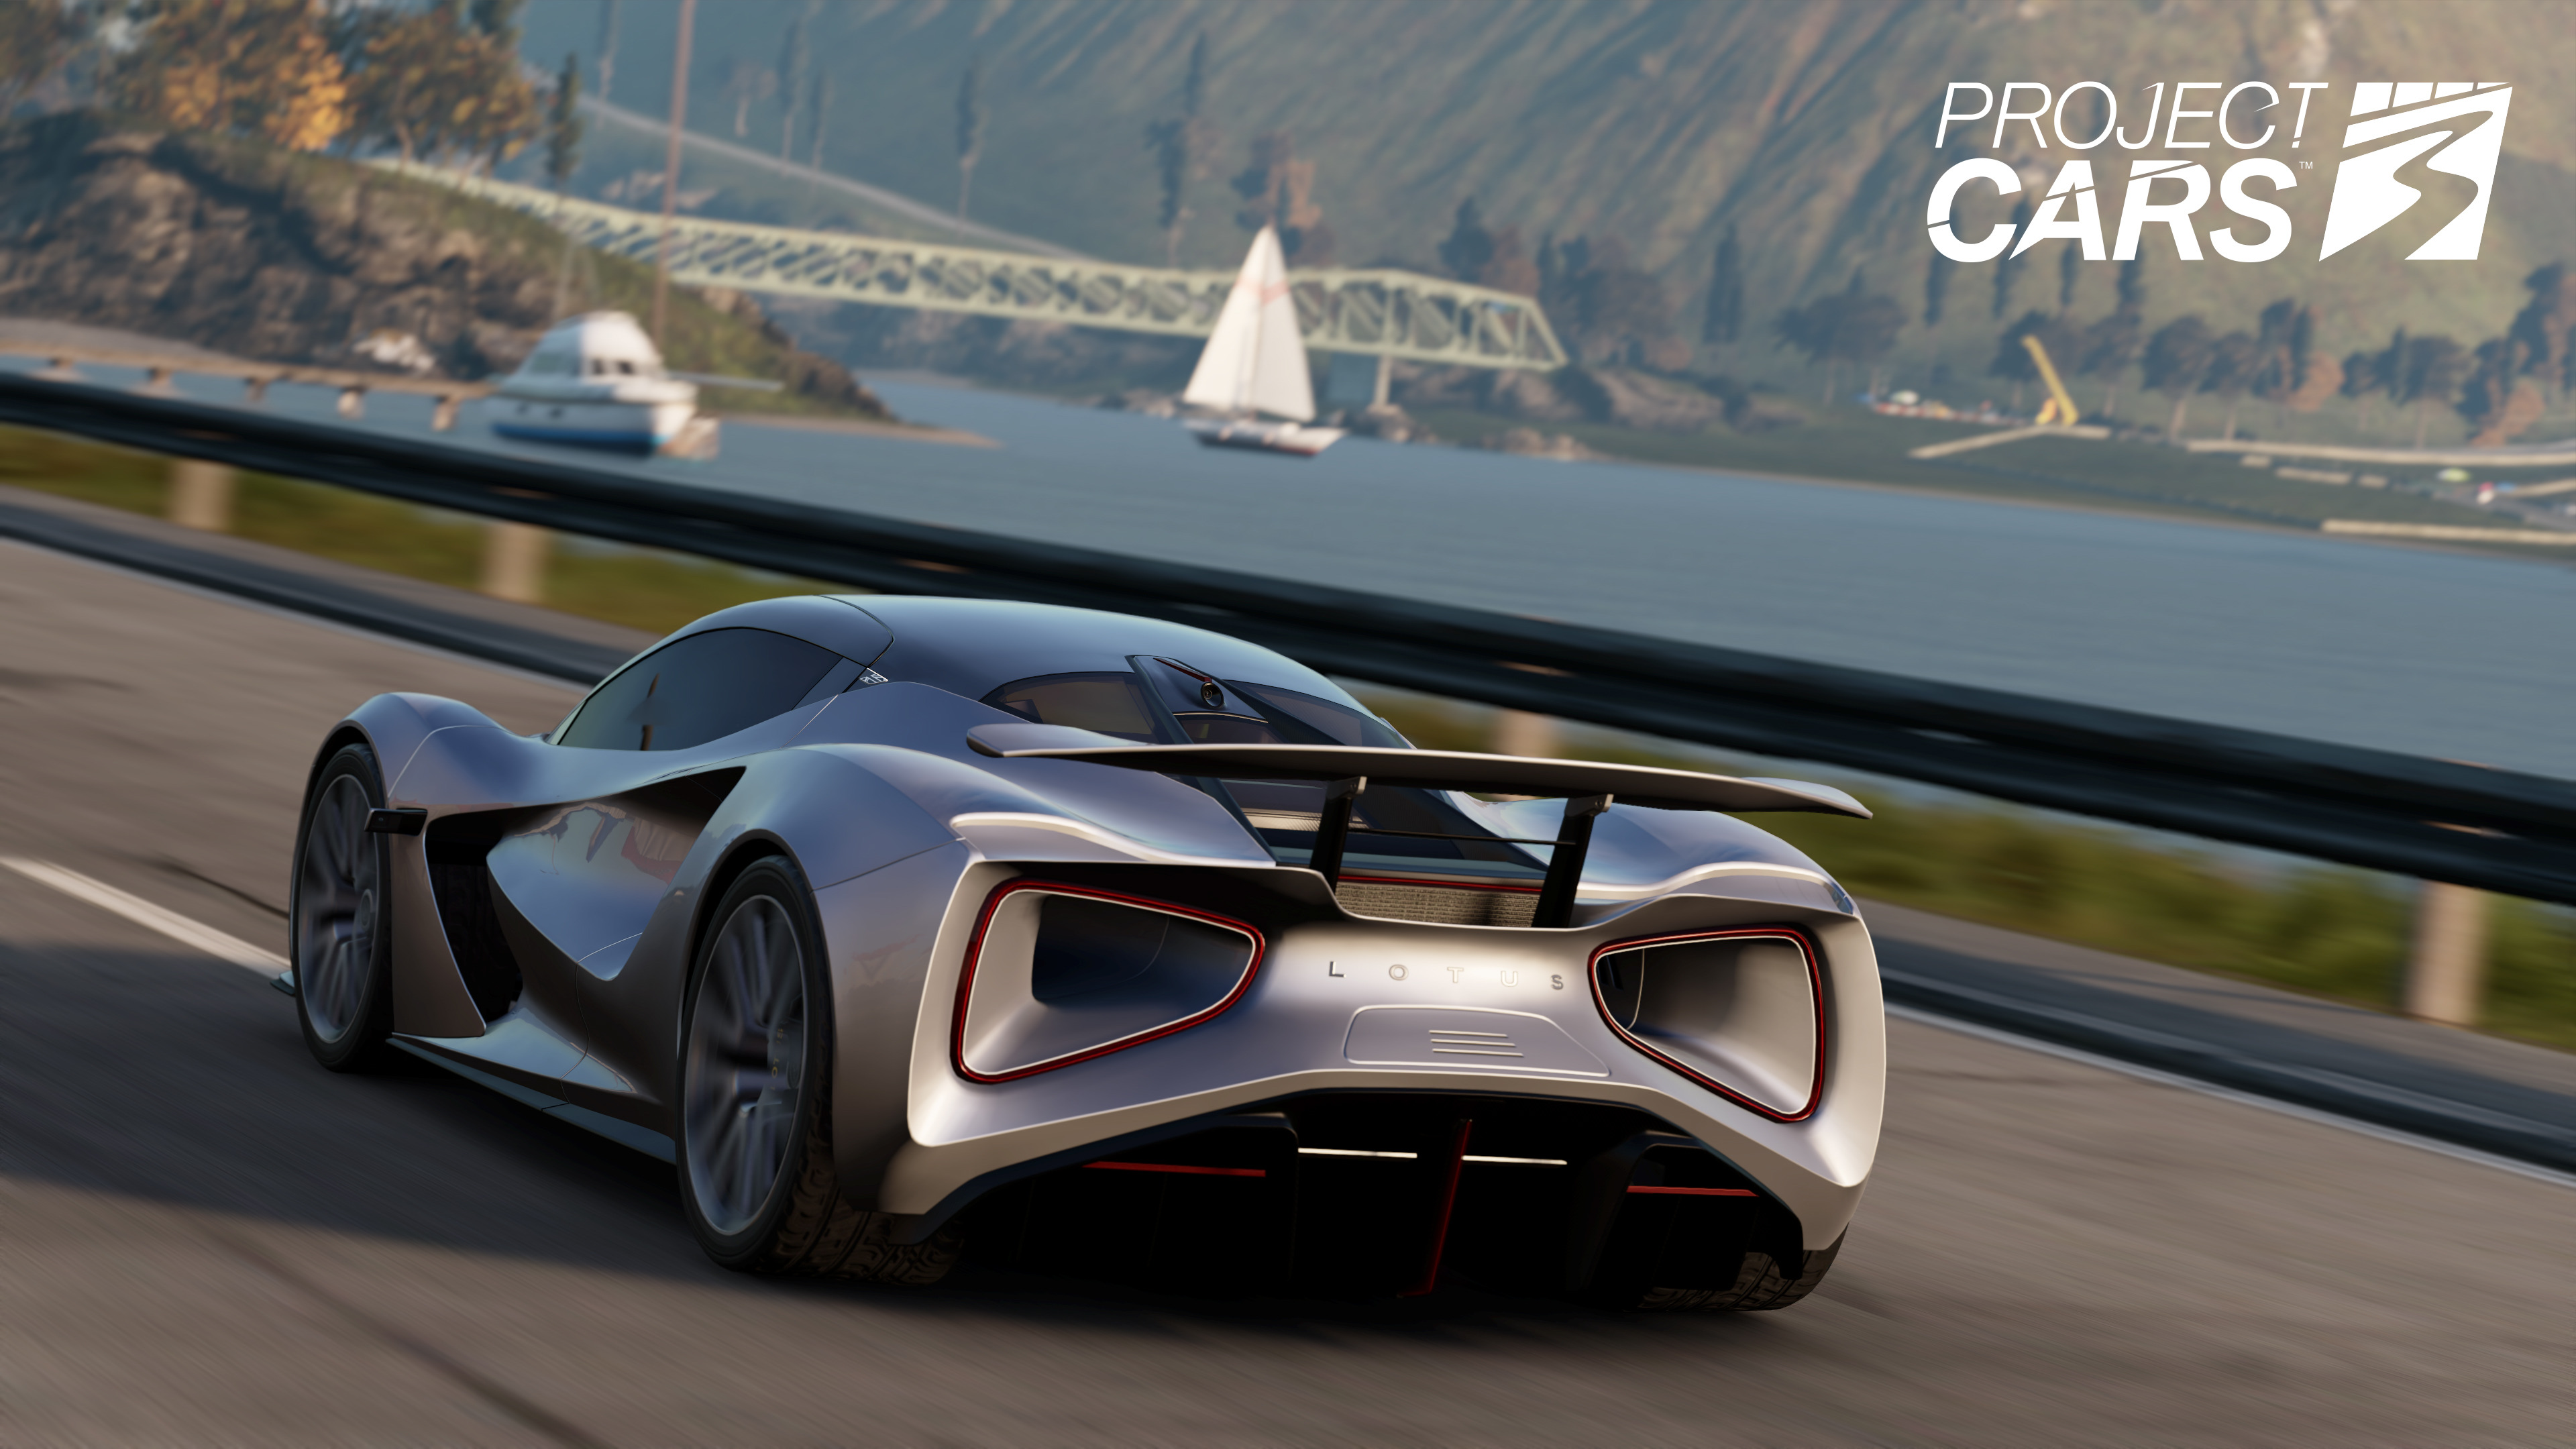 Video Game Project Cars 3 3840x2160